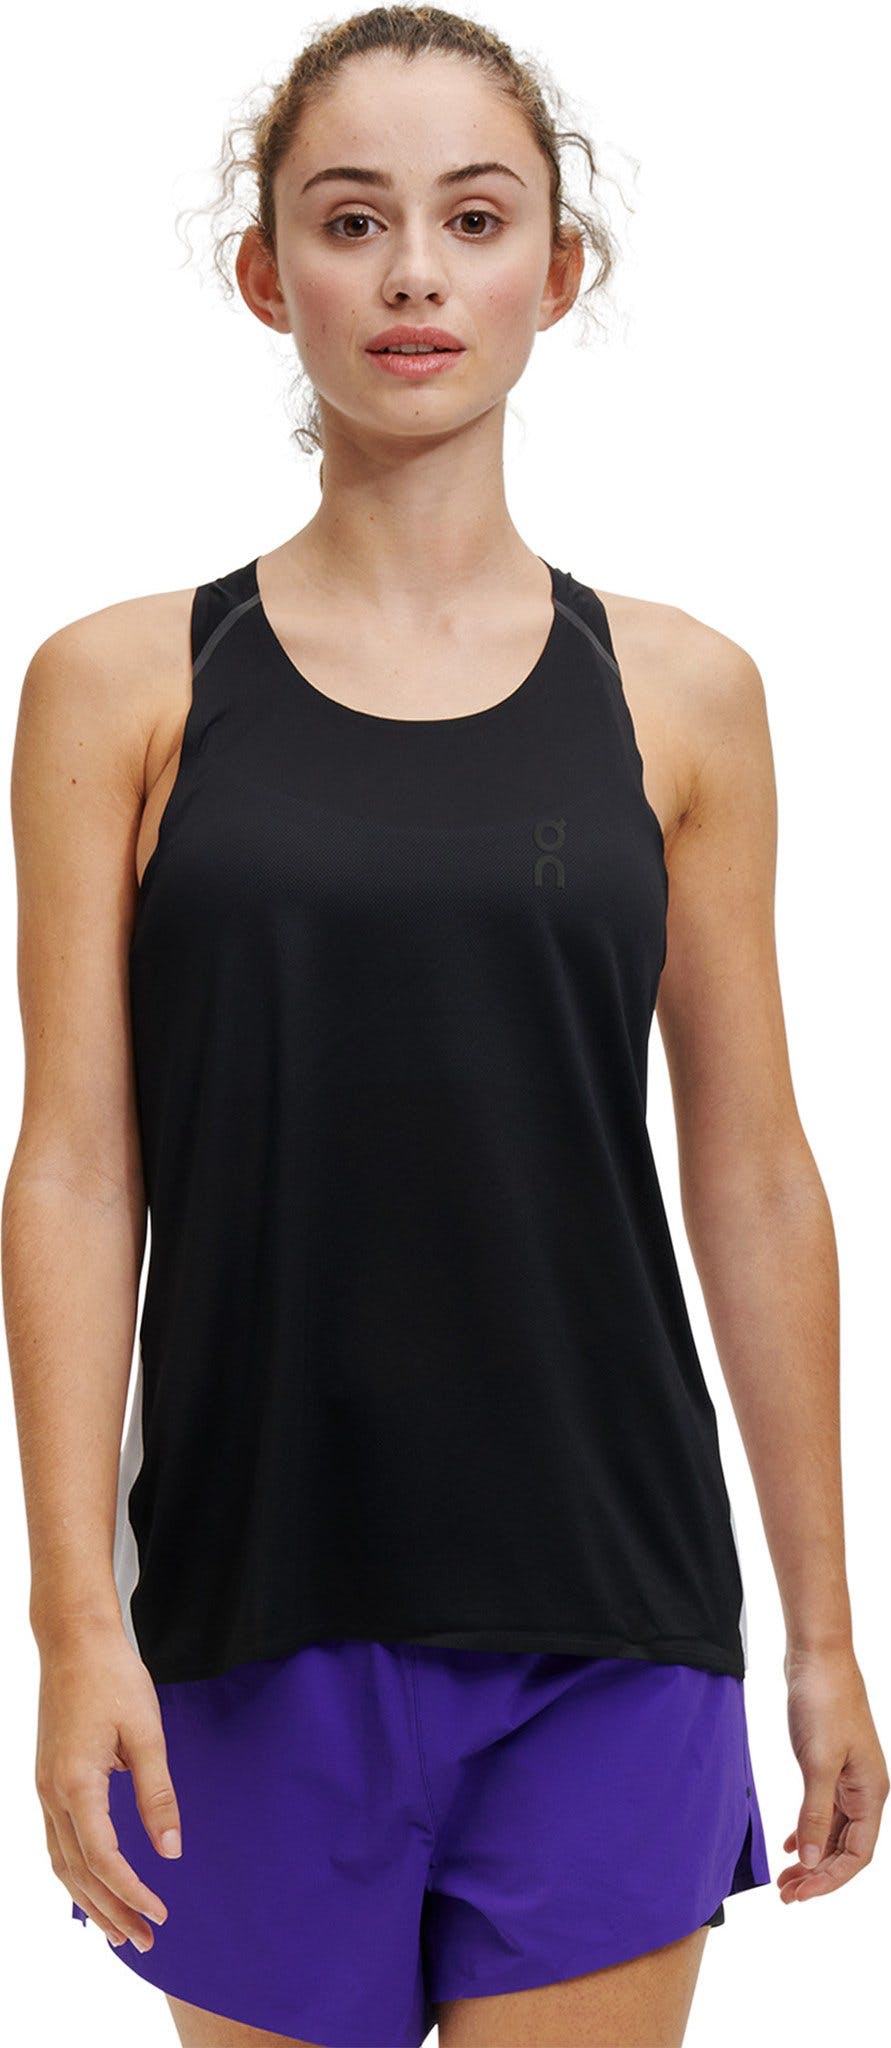 Product image for Tank-T Shirt - Women's